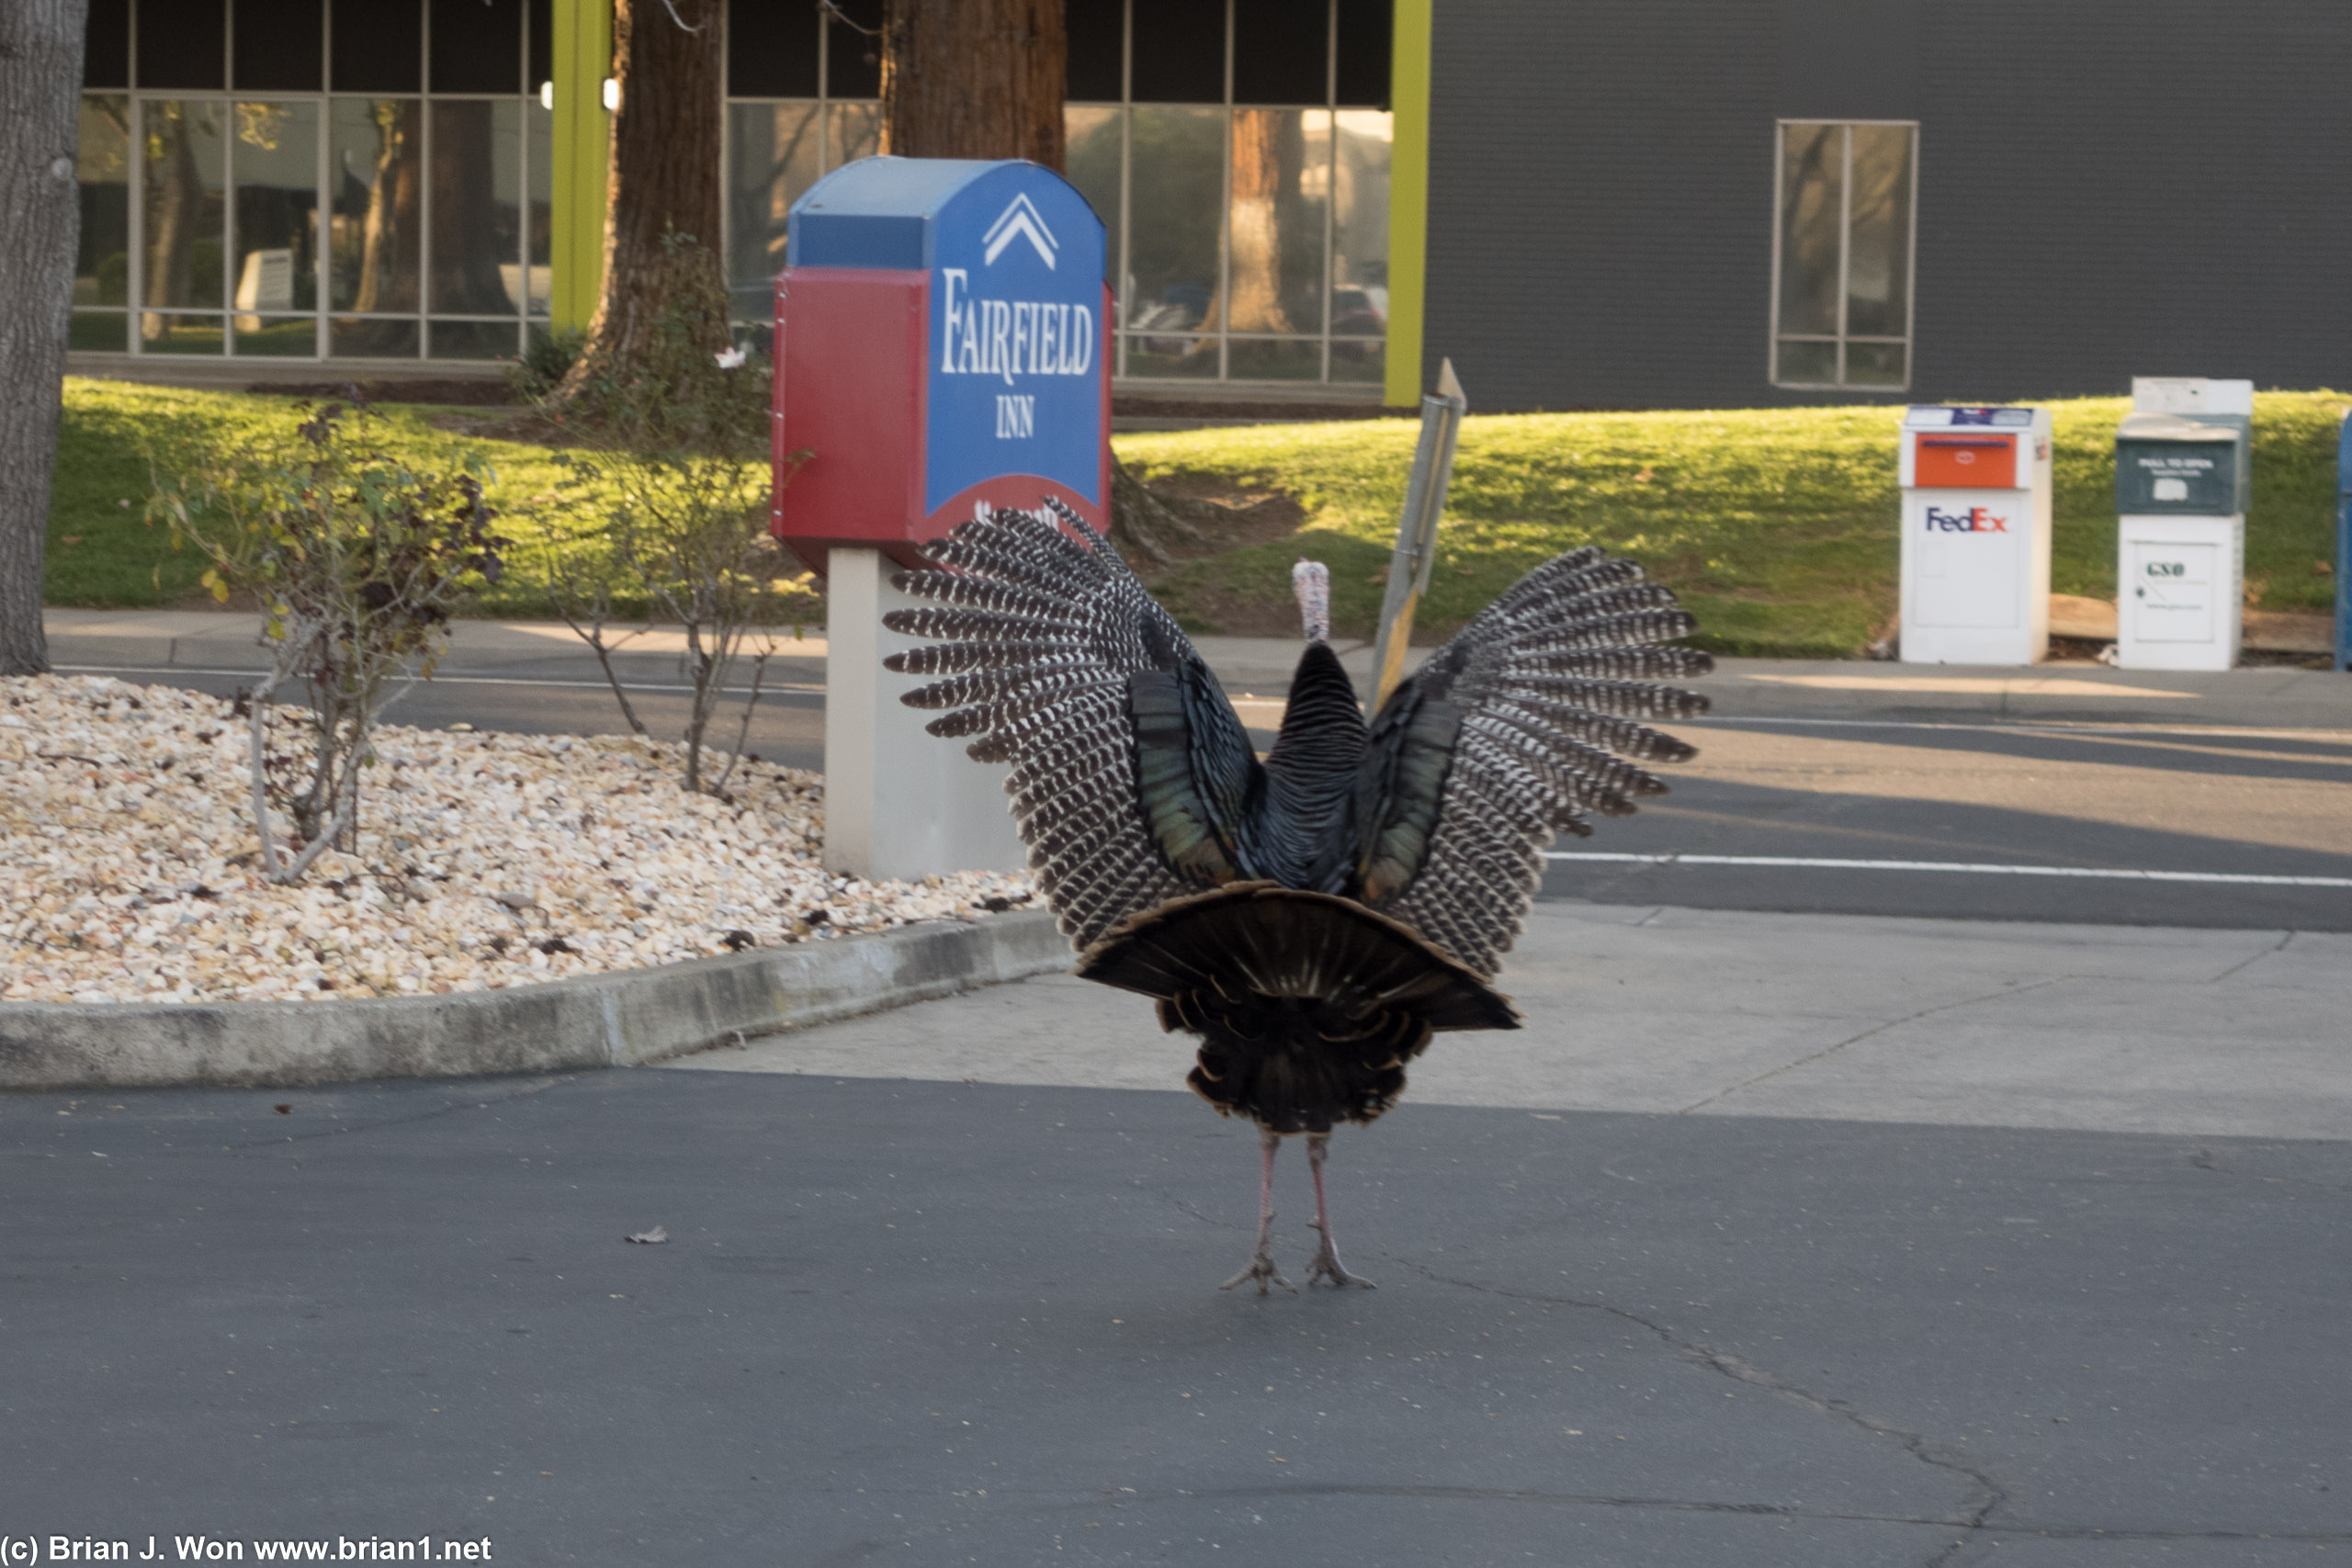 A turkey spreading its wings in the hotel driveway.